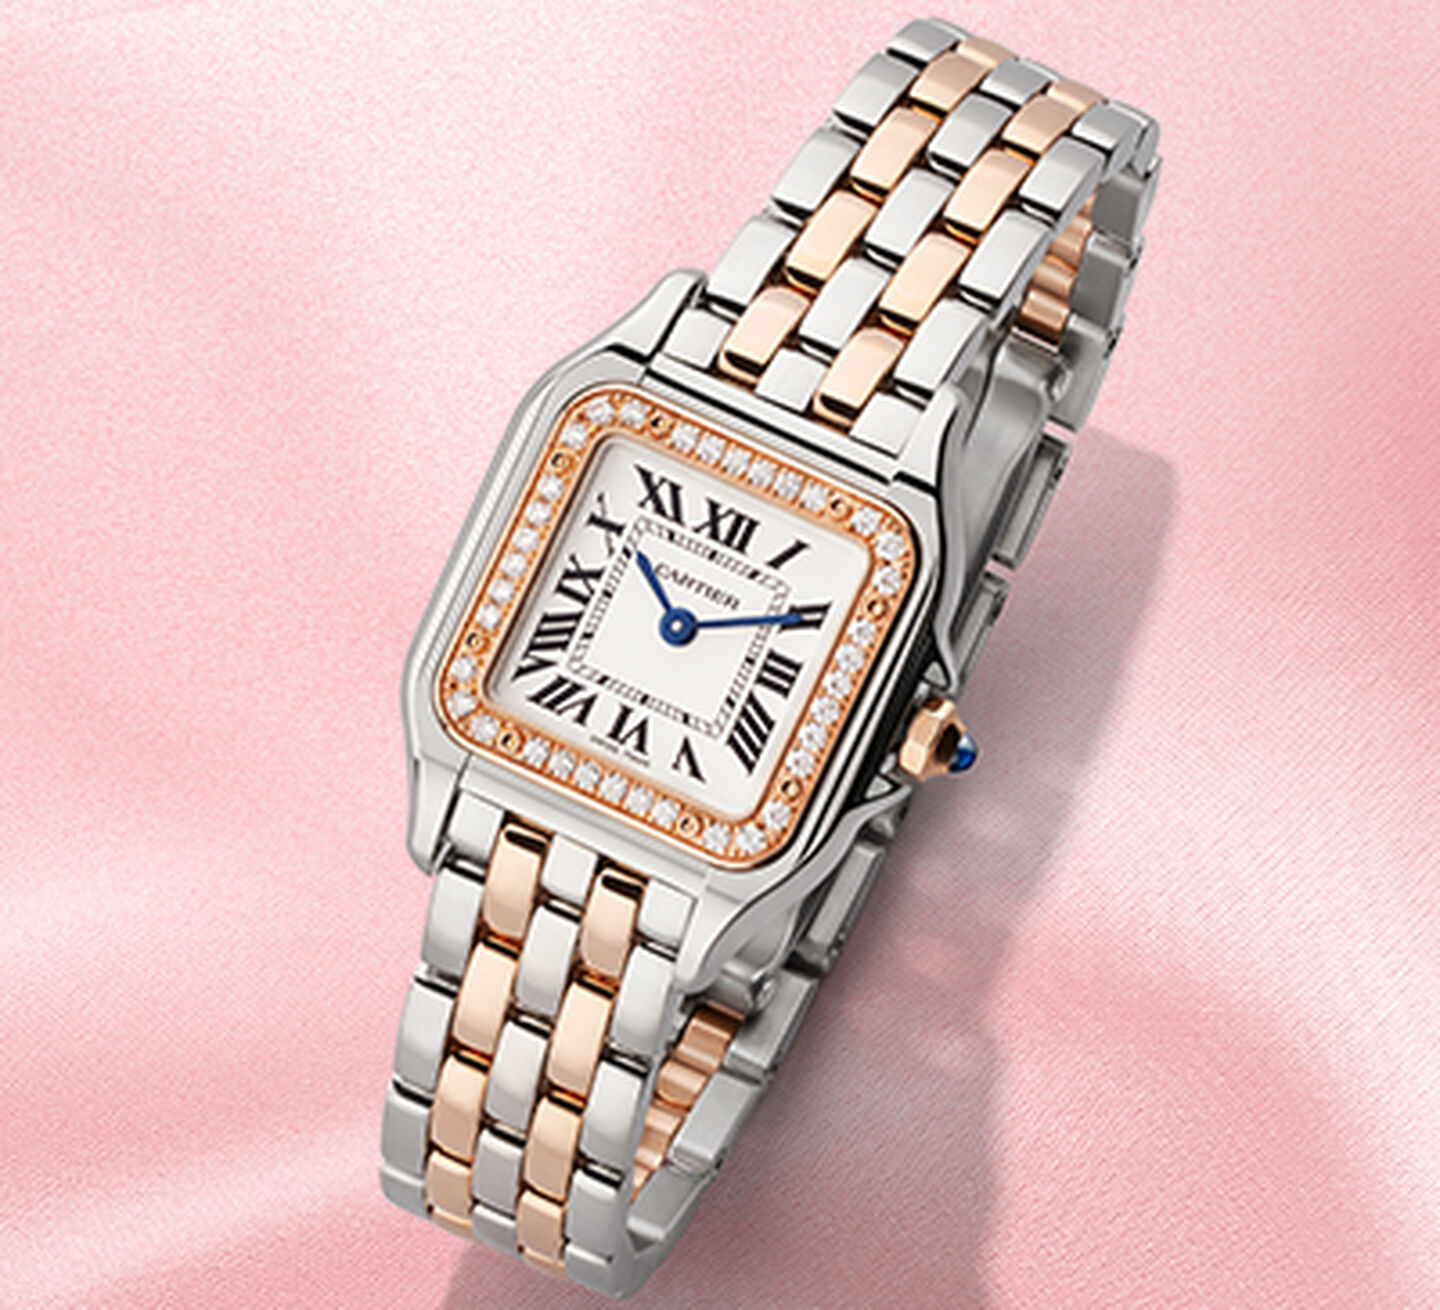 Cartier Panthere two tone rose gold and stainless steel watch on a pink background